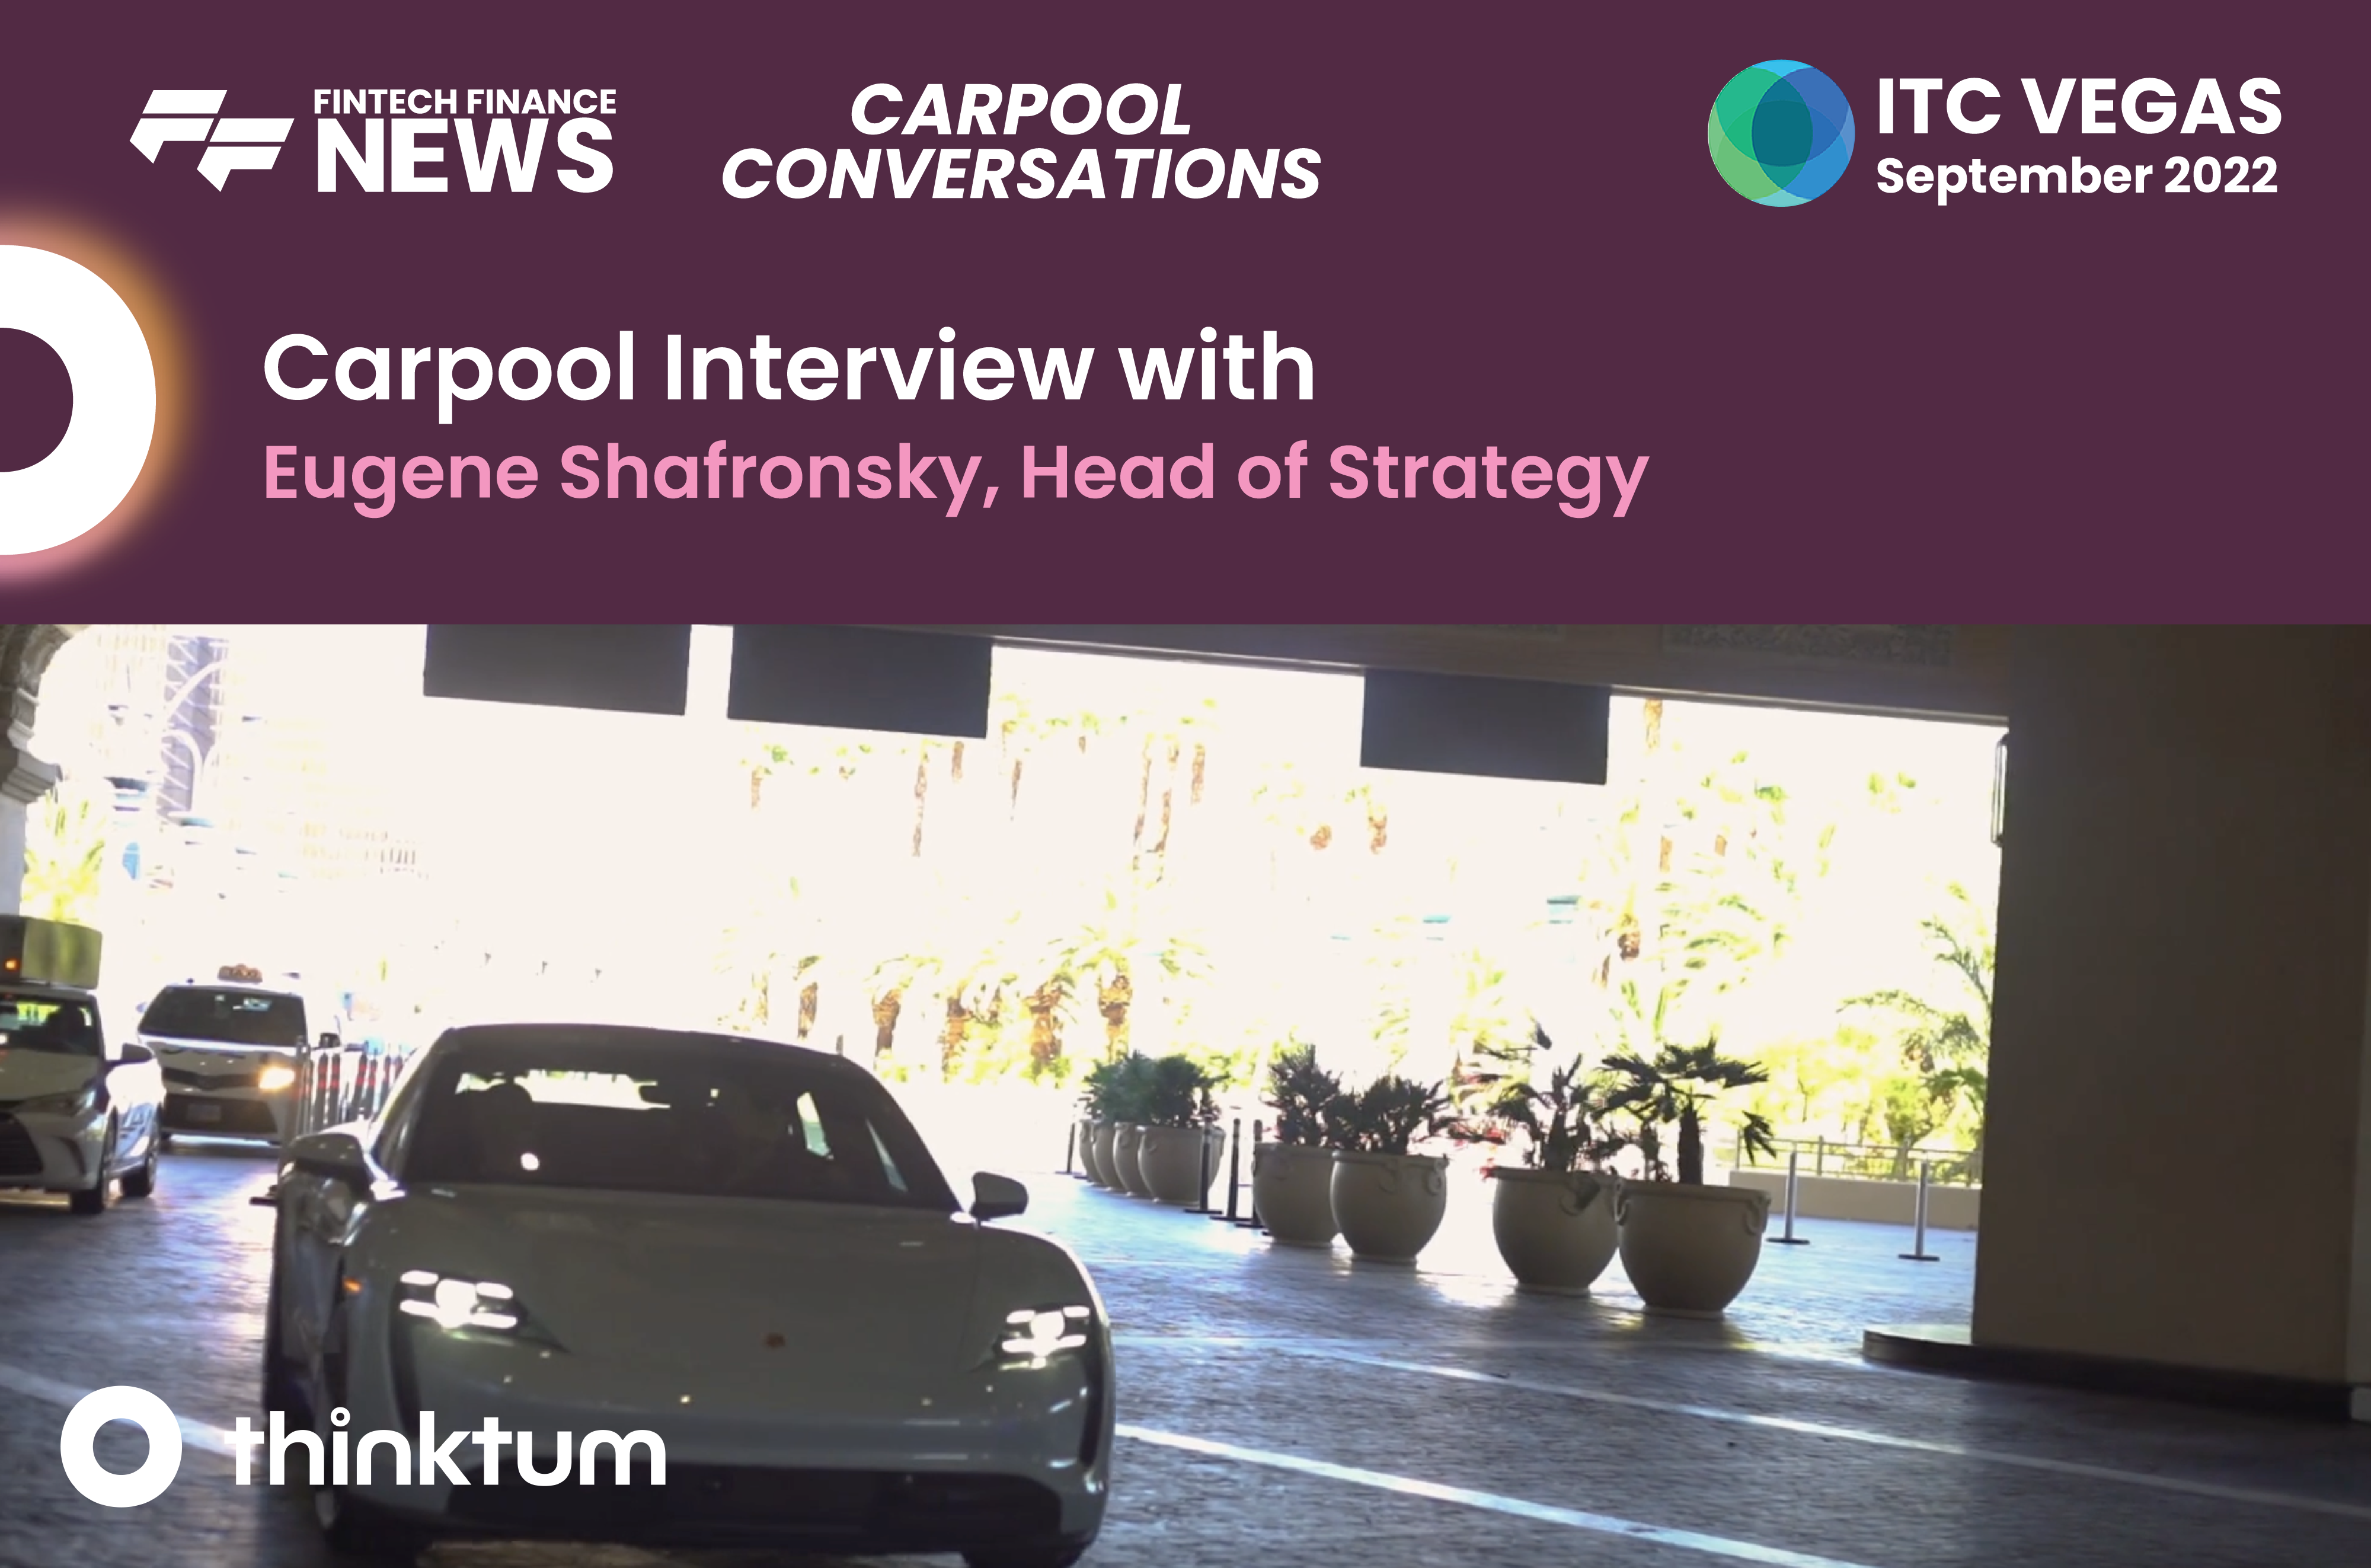 Ad ad featuring a photo of a sportscar at a hotel, with the text: Carpool interview with Eugene Shafronsky, Head of Strategy. The FF News logo, ITC Vegas logo and thinktum logos also appear.